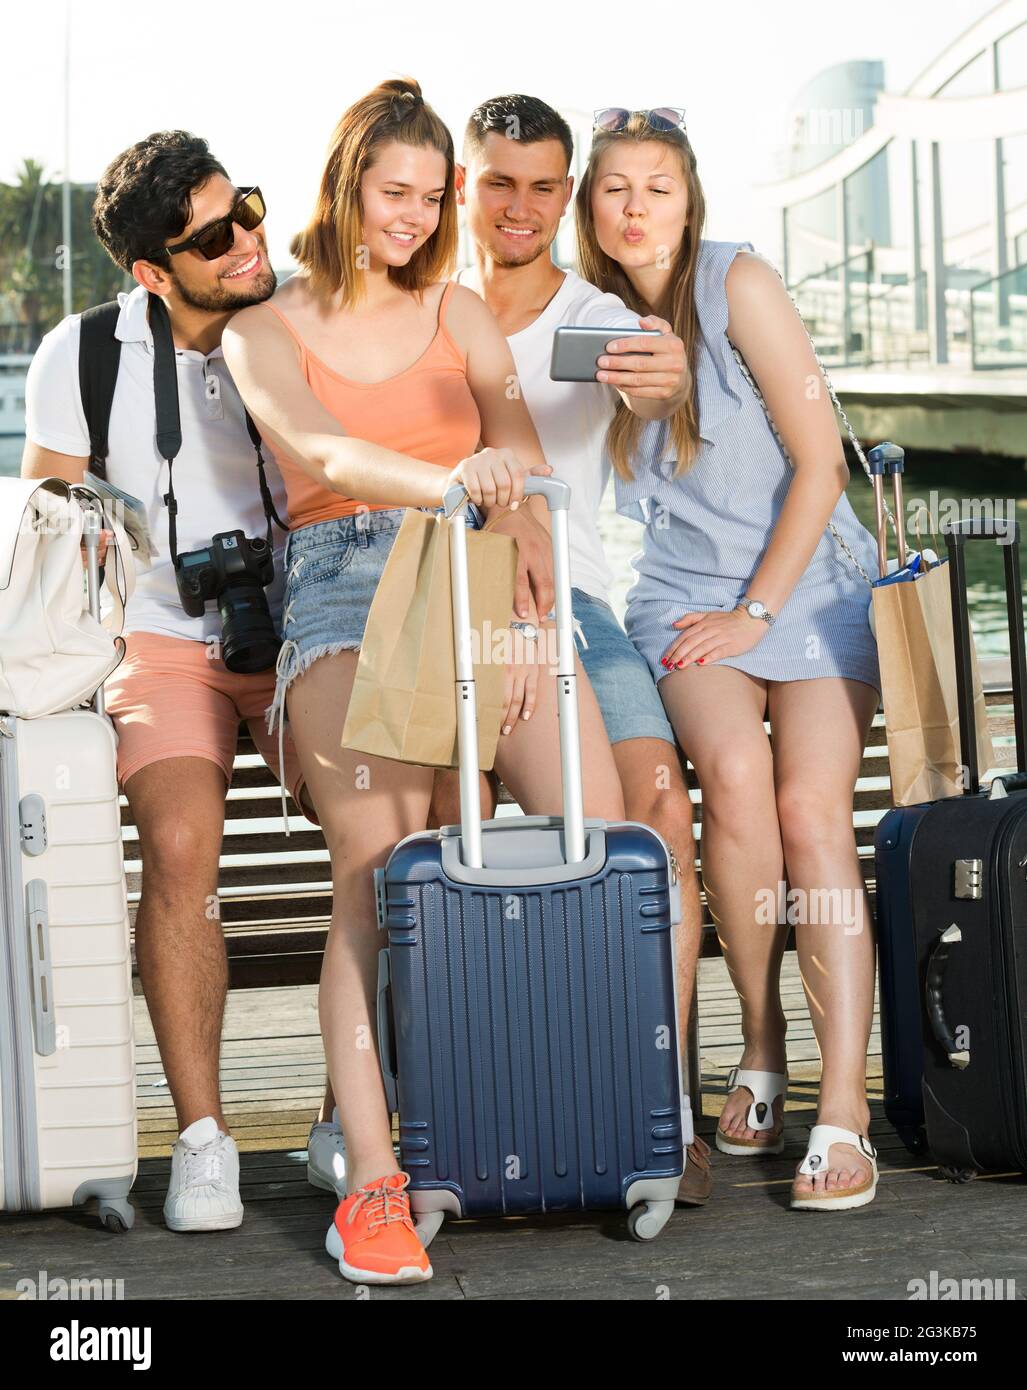 Group of tourists are taking selfies on phone in european town Stock Photo